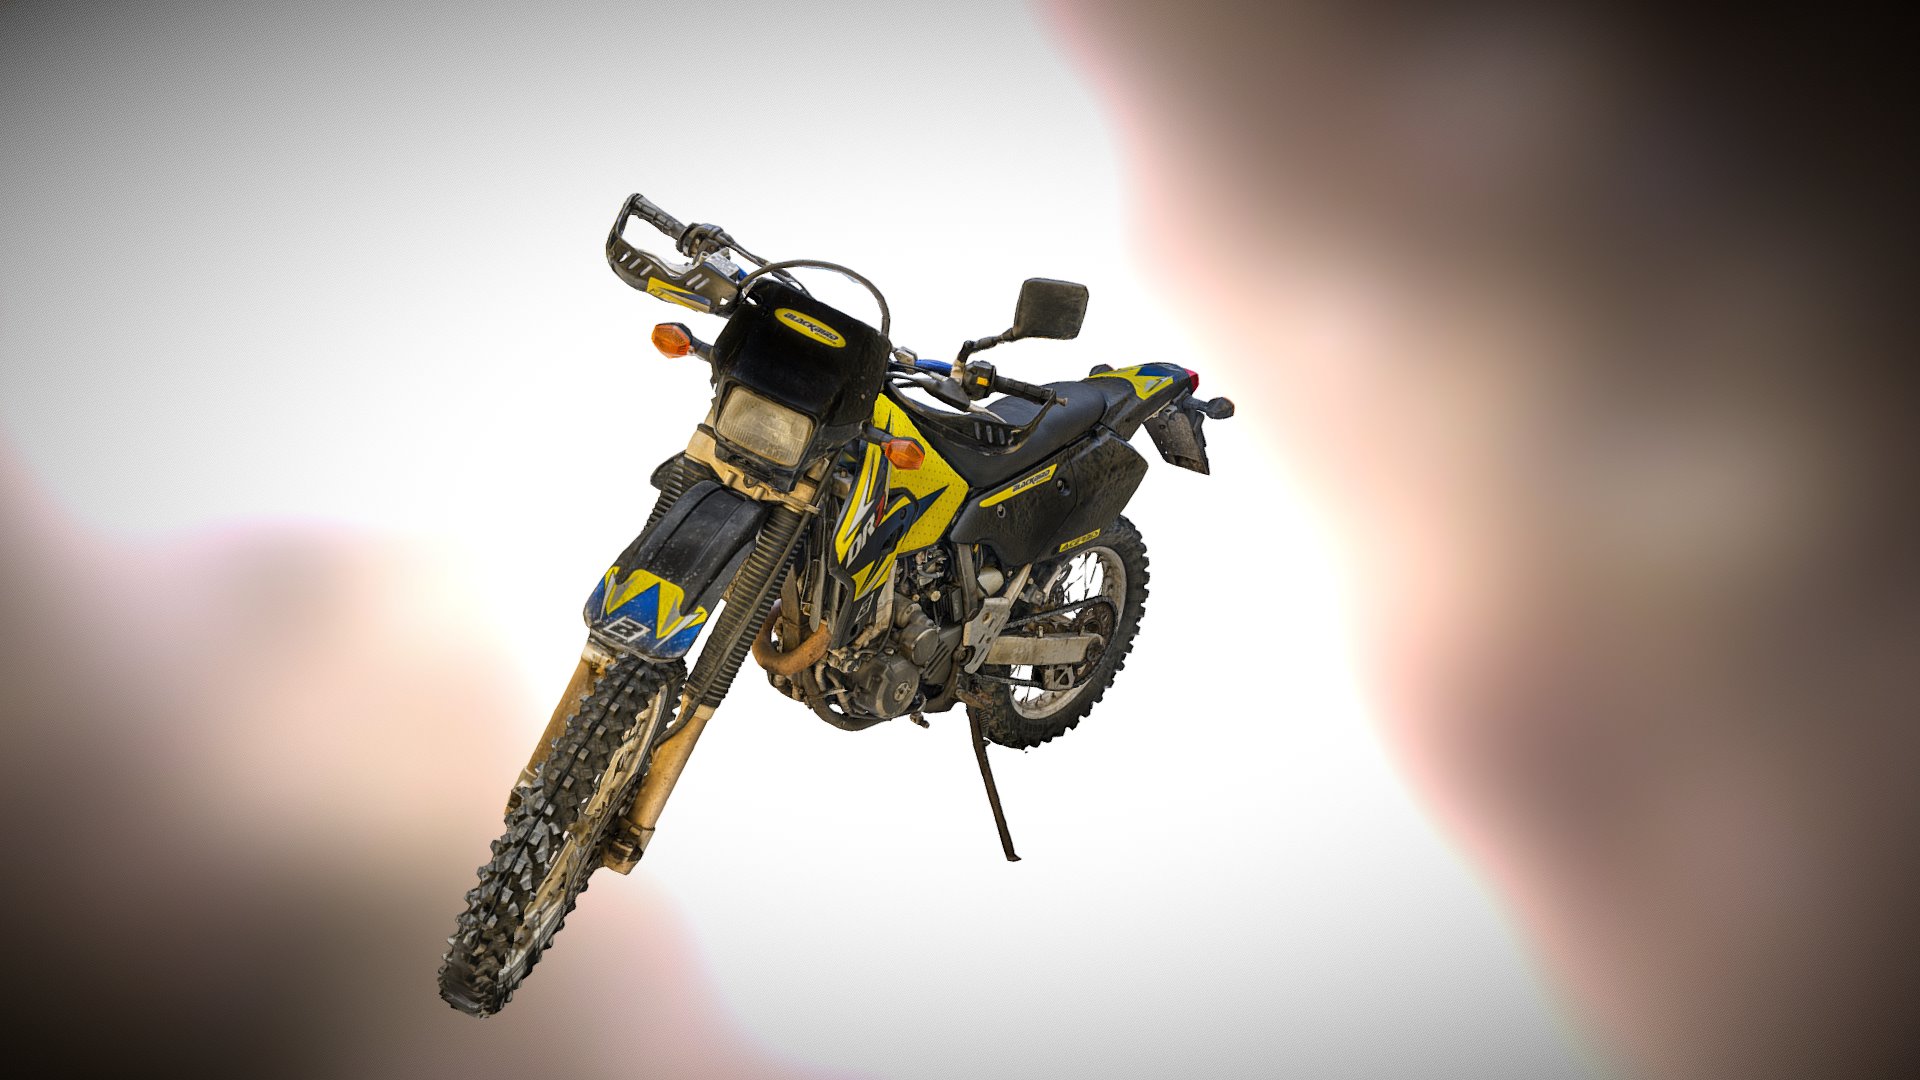 3D model Suzuki bike DRZ 400 E isolated scan 100k - This is a 3D model of the Suzuki bike DRZ 400 E isolated scan 100k. The 3D model is about a motorcycle flying through the air.